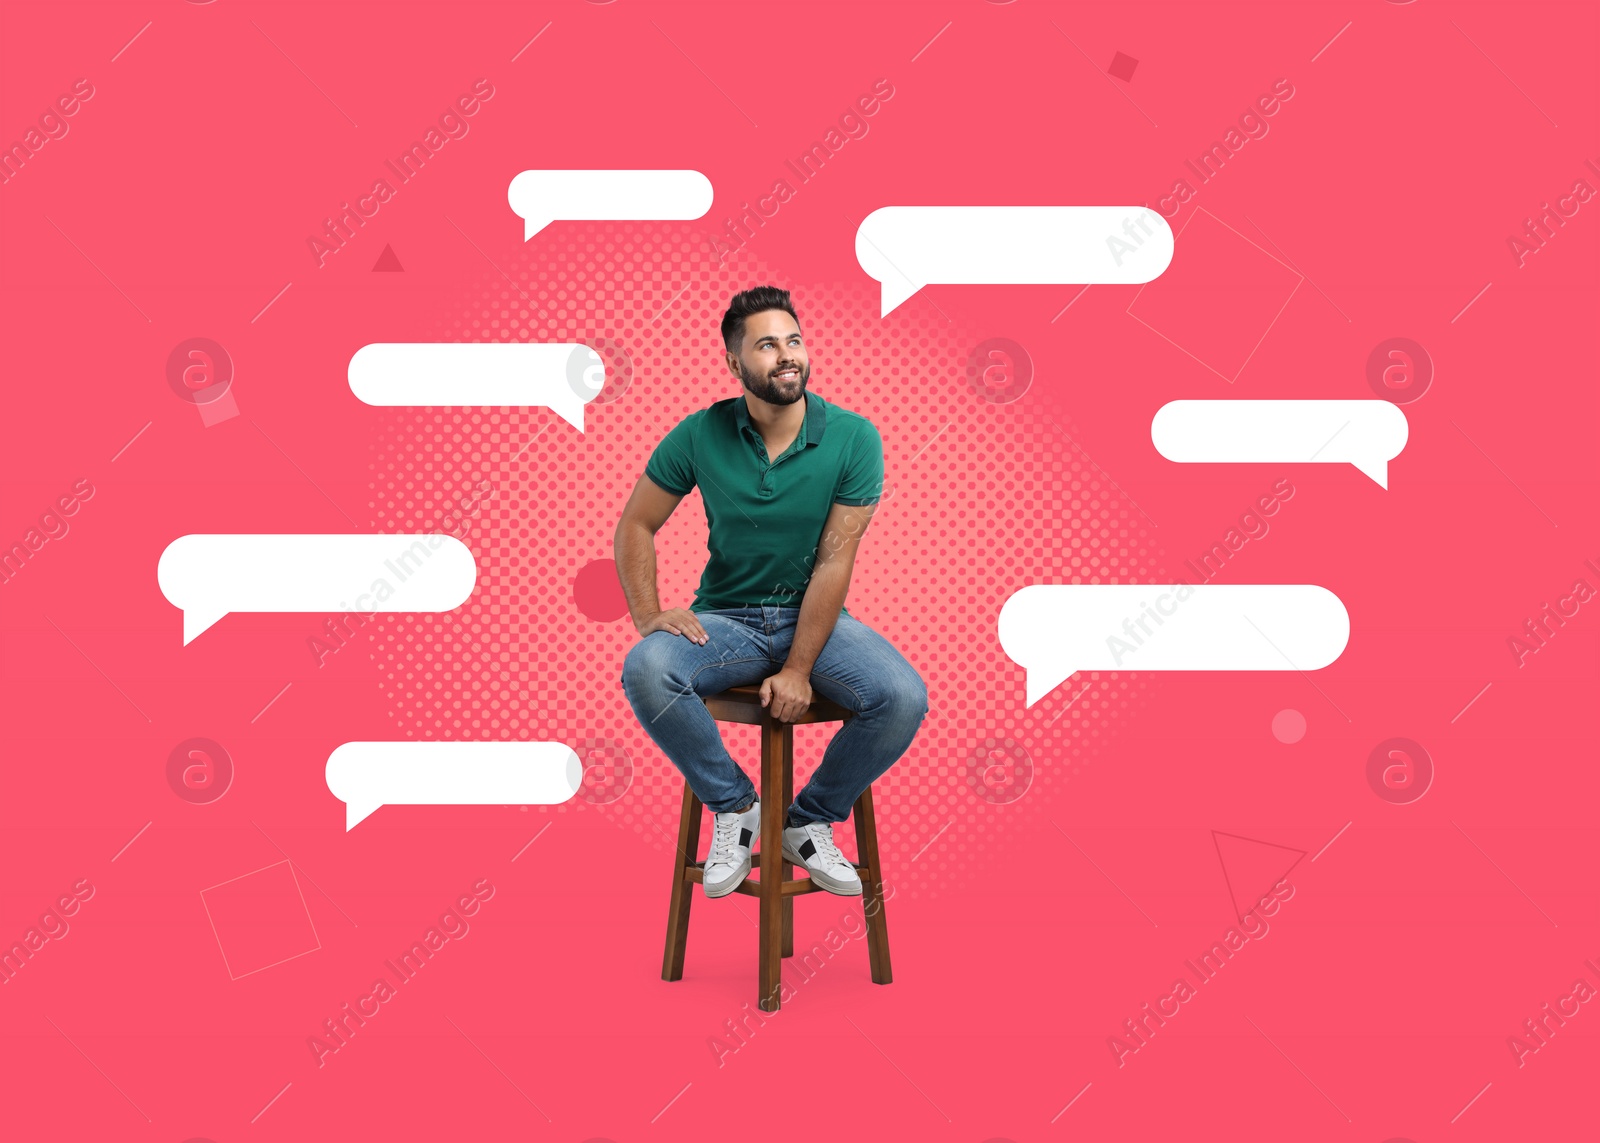 Image of Communication, dialogue. Handsome young man sitting on stool against red background. Speech bubbles around him